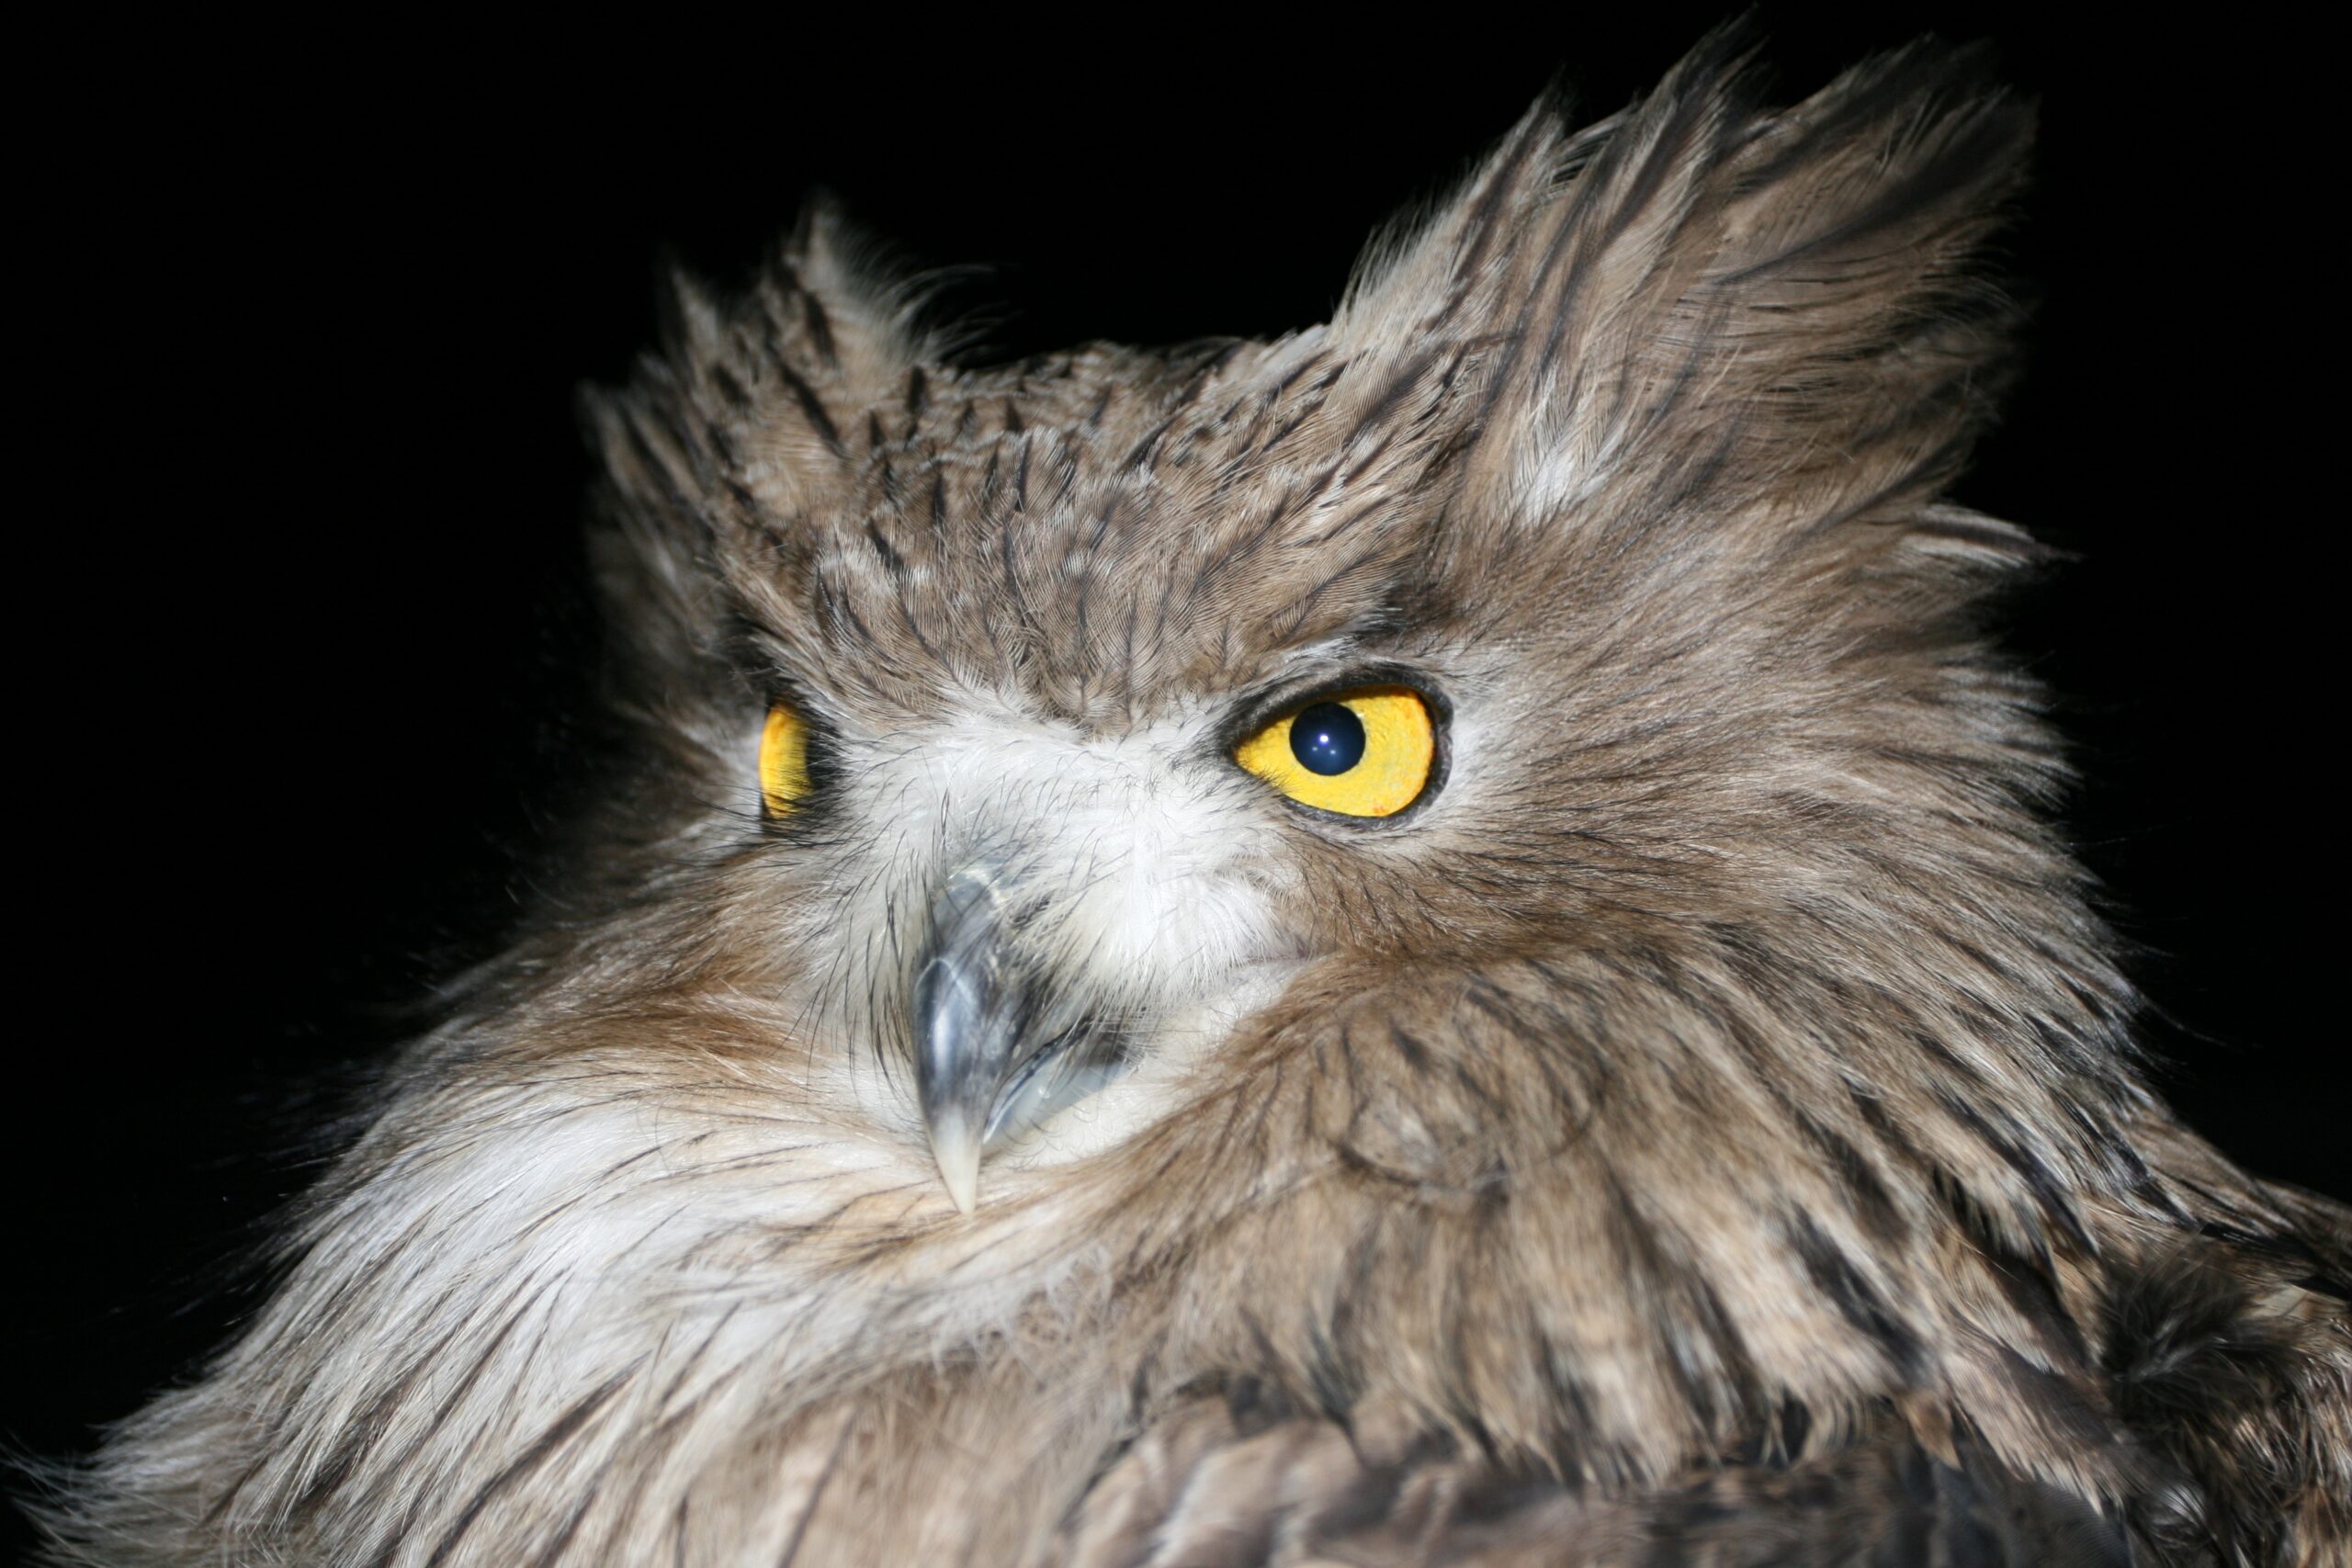 An owl with bright yellow eyes and small face is photographed in the night.